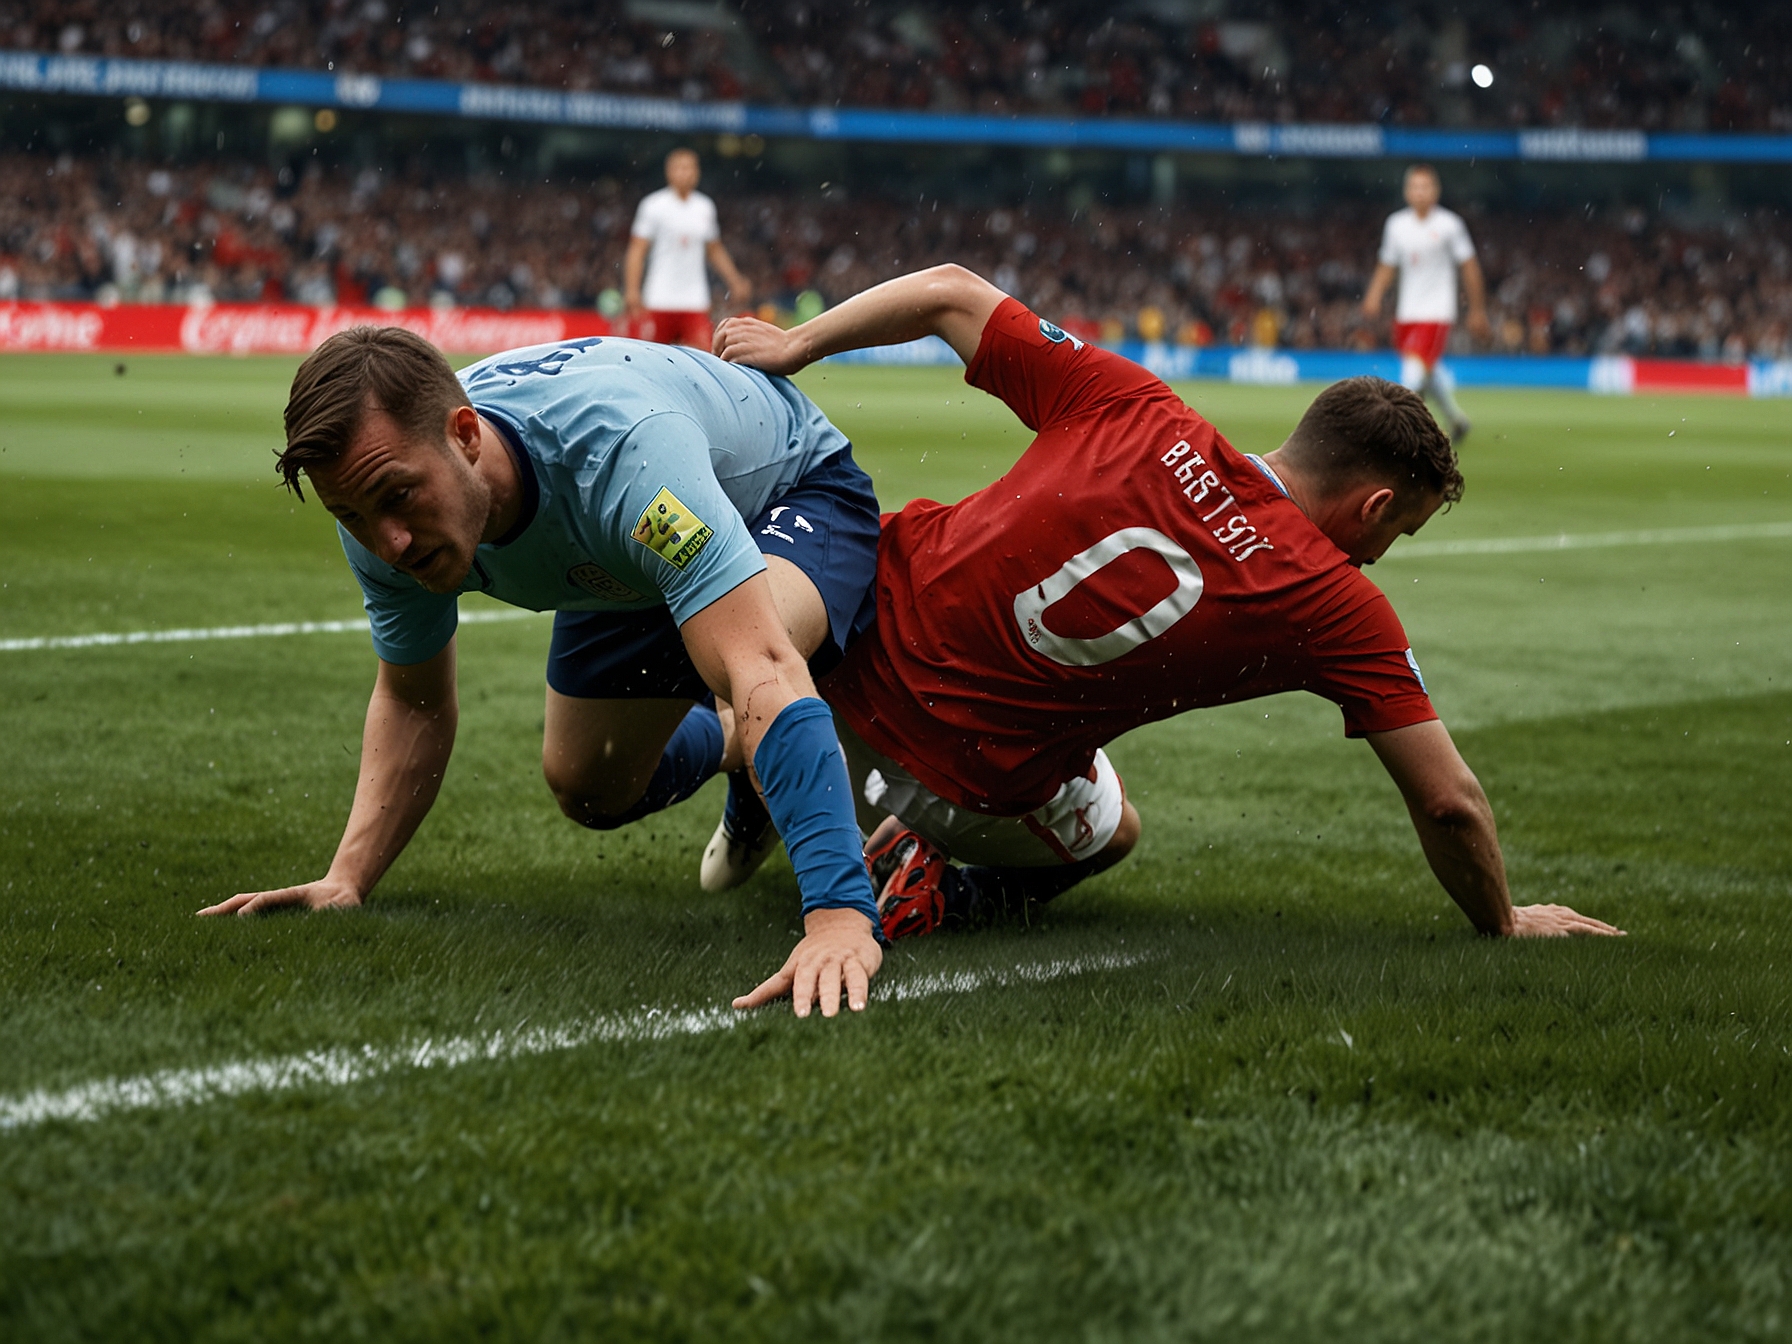 Players slipping on the uneven and wet turf at Frankfurt Arena during the England vs Denmark match, highlighting the challenging pitch conditions that impacted the game's flow and player performance.